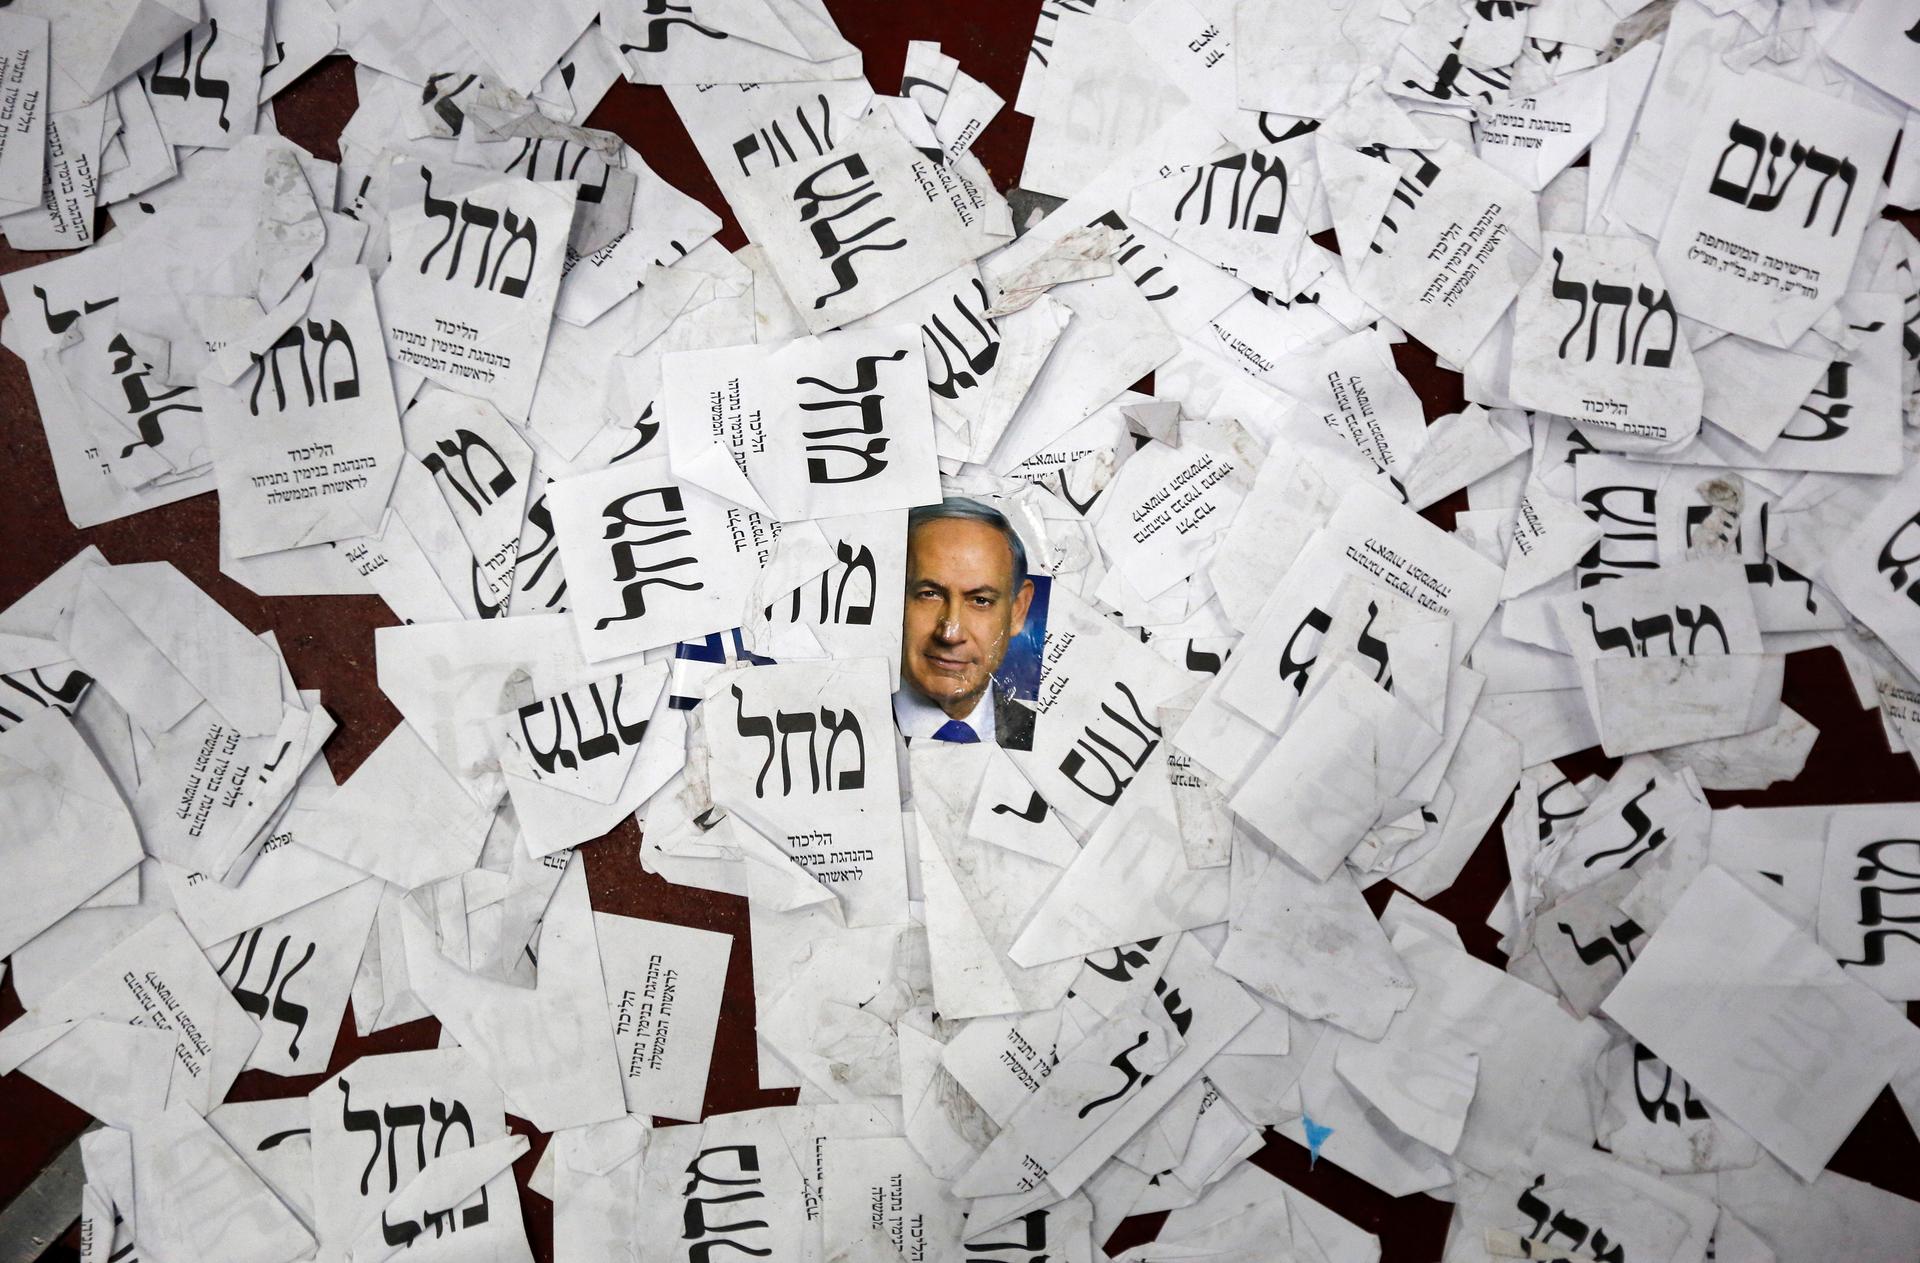 A photograph of Israeli Prime Minister Benjamin Netanyahu is seen on the floor with Likud party ballots at Likud party headquarters in Tel Aviv March 18, 2015.